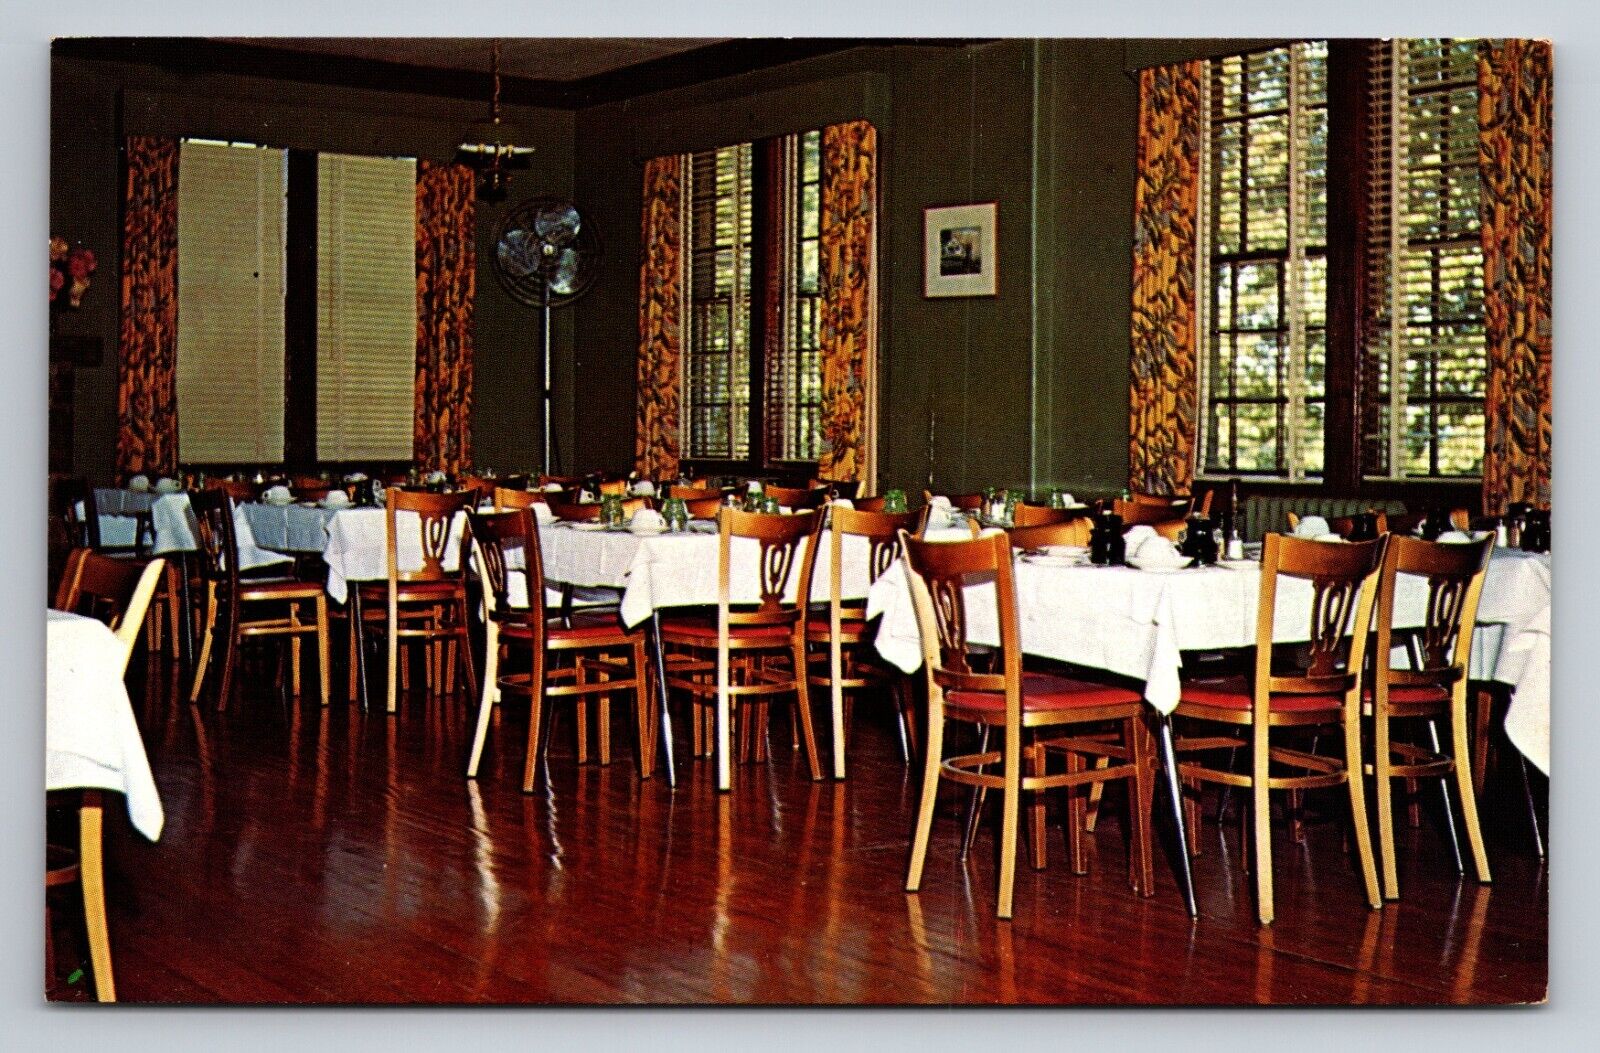 Warwick Estates Conference Center  Reformed Church New York Dining Room Unposted